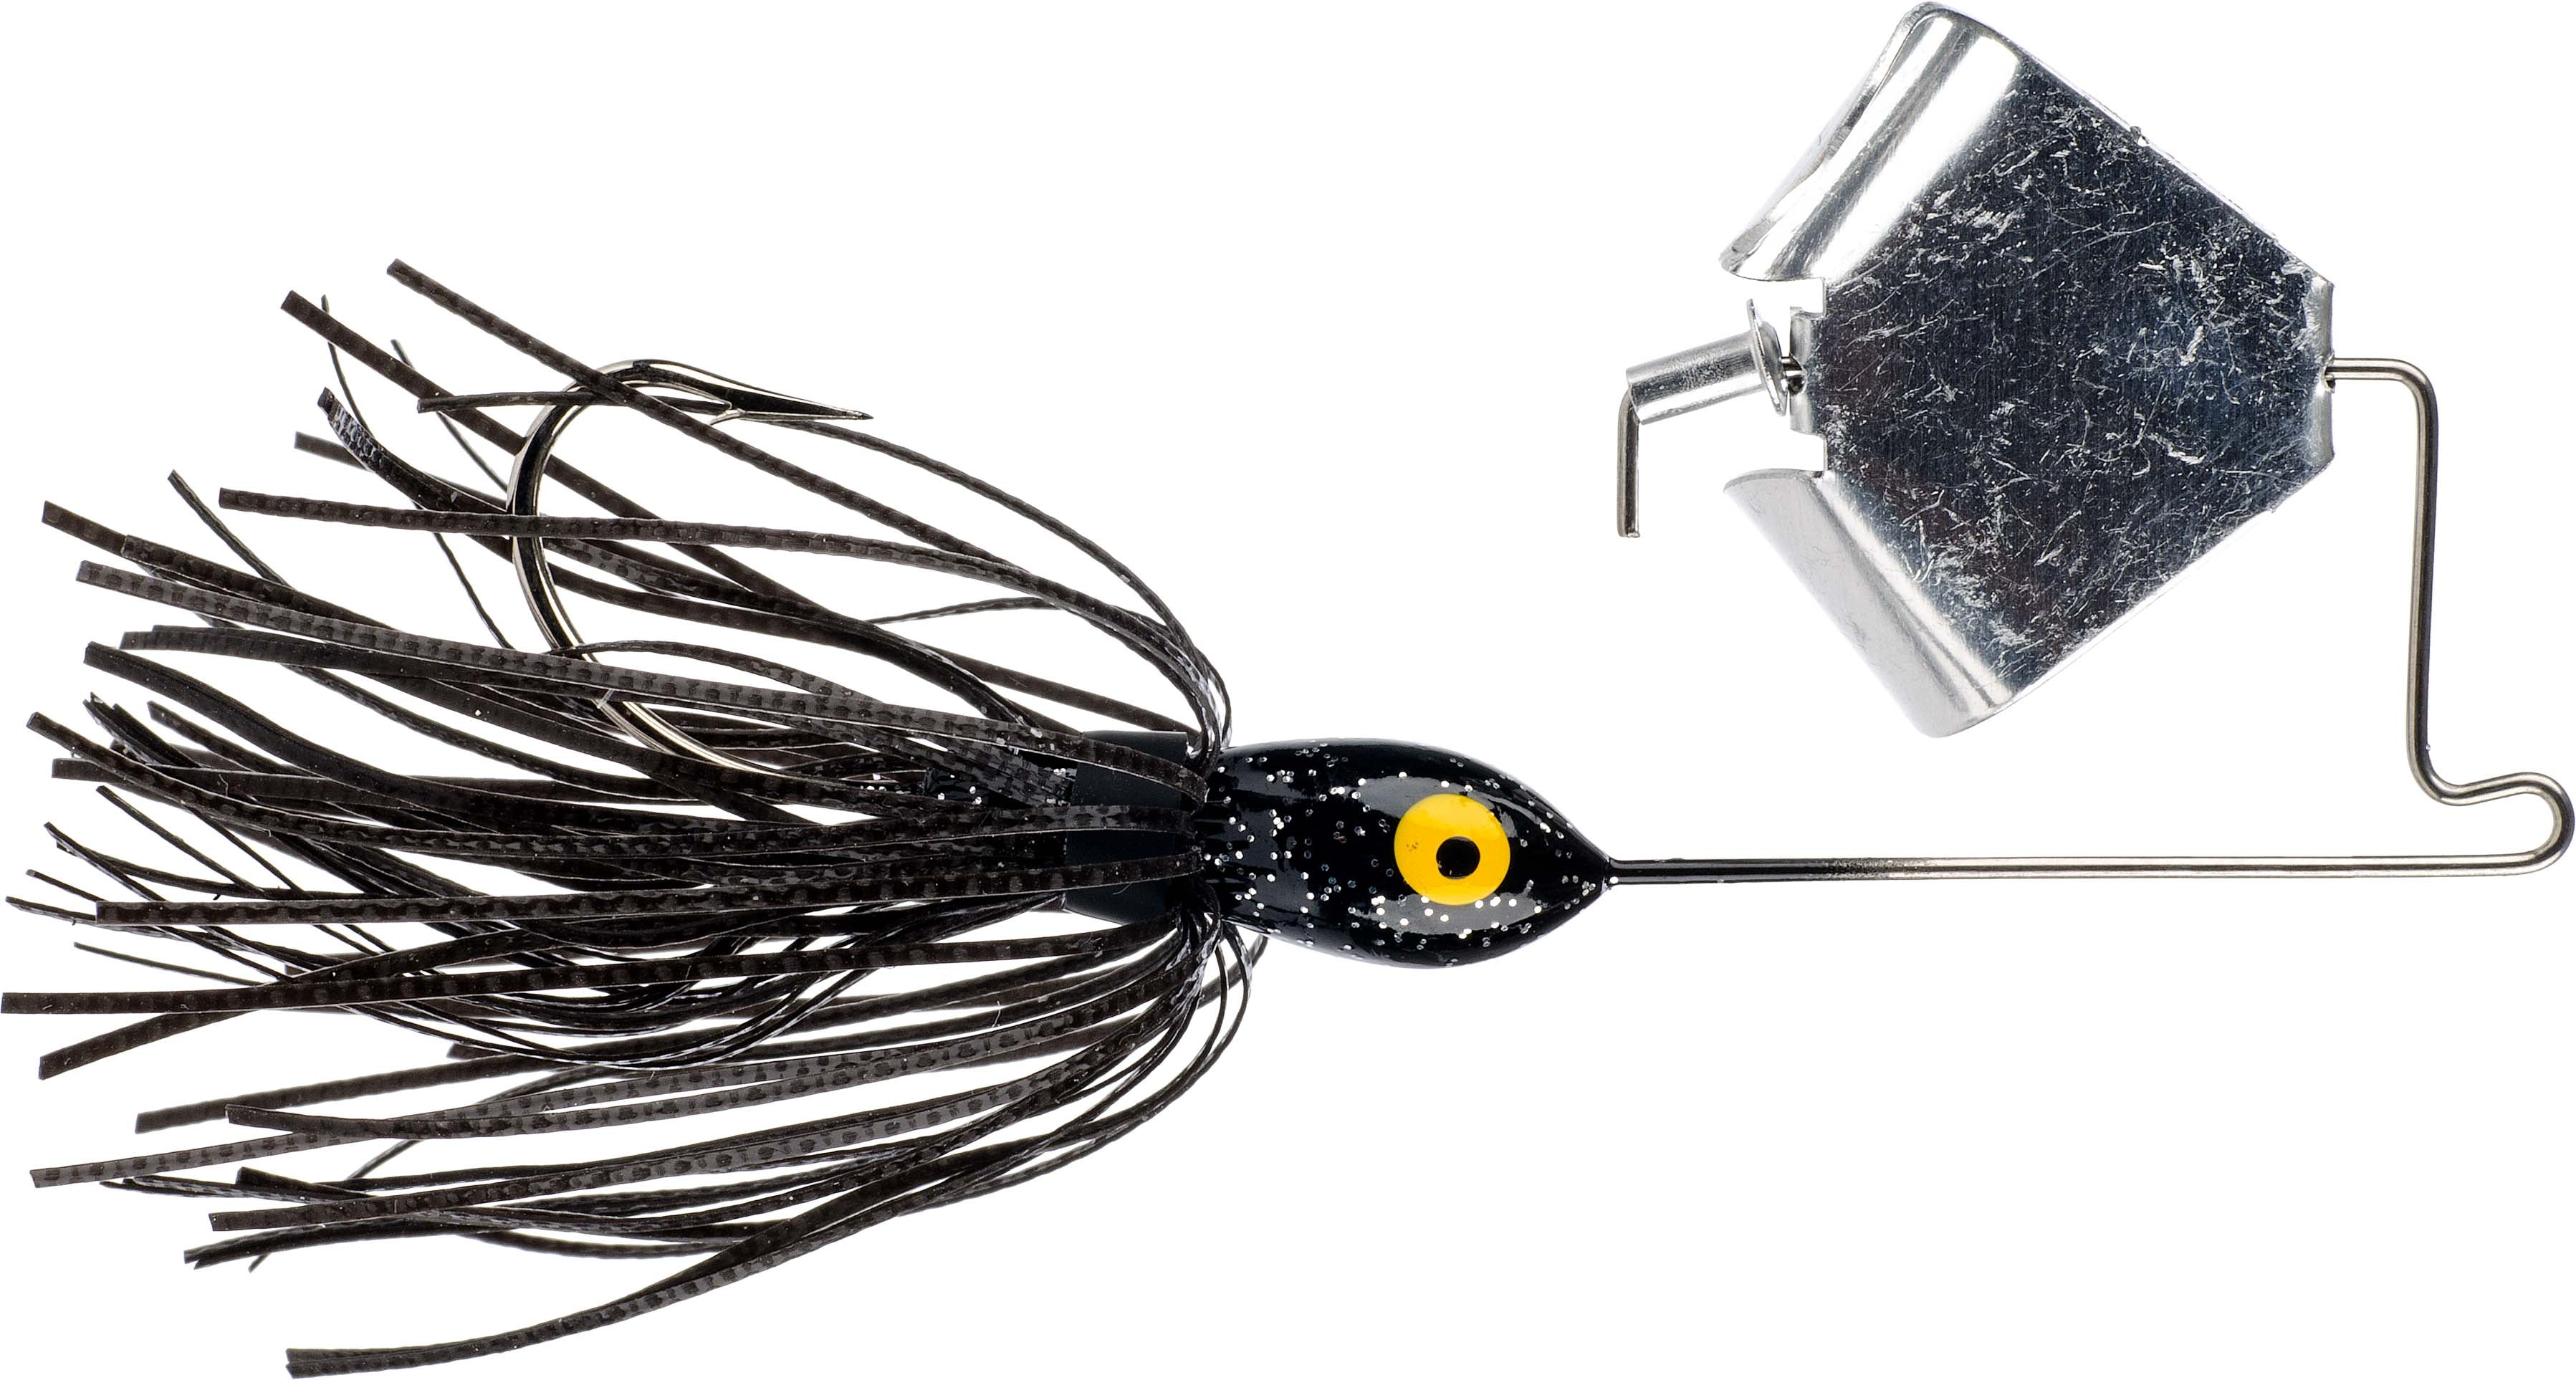 Buzzbait – Explosive, Fun, And An Absolute Must